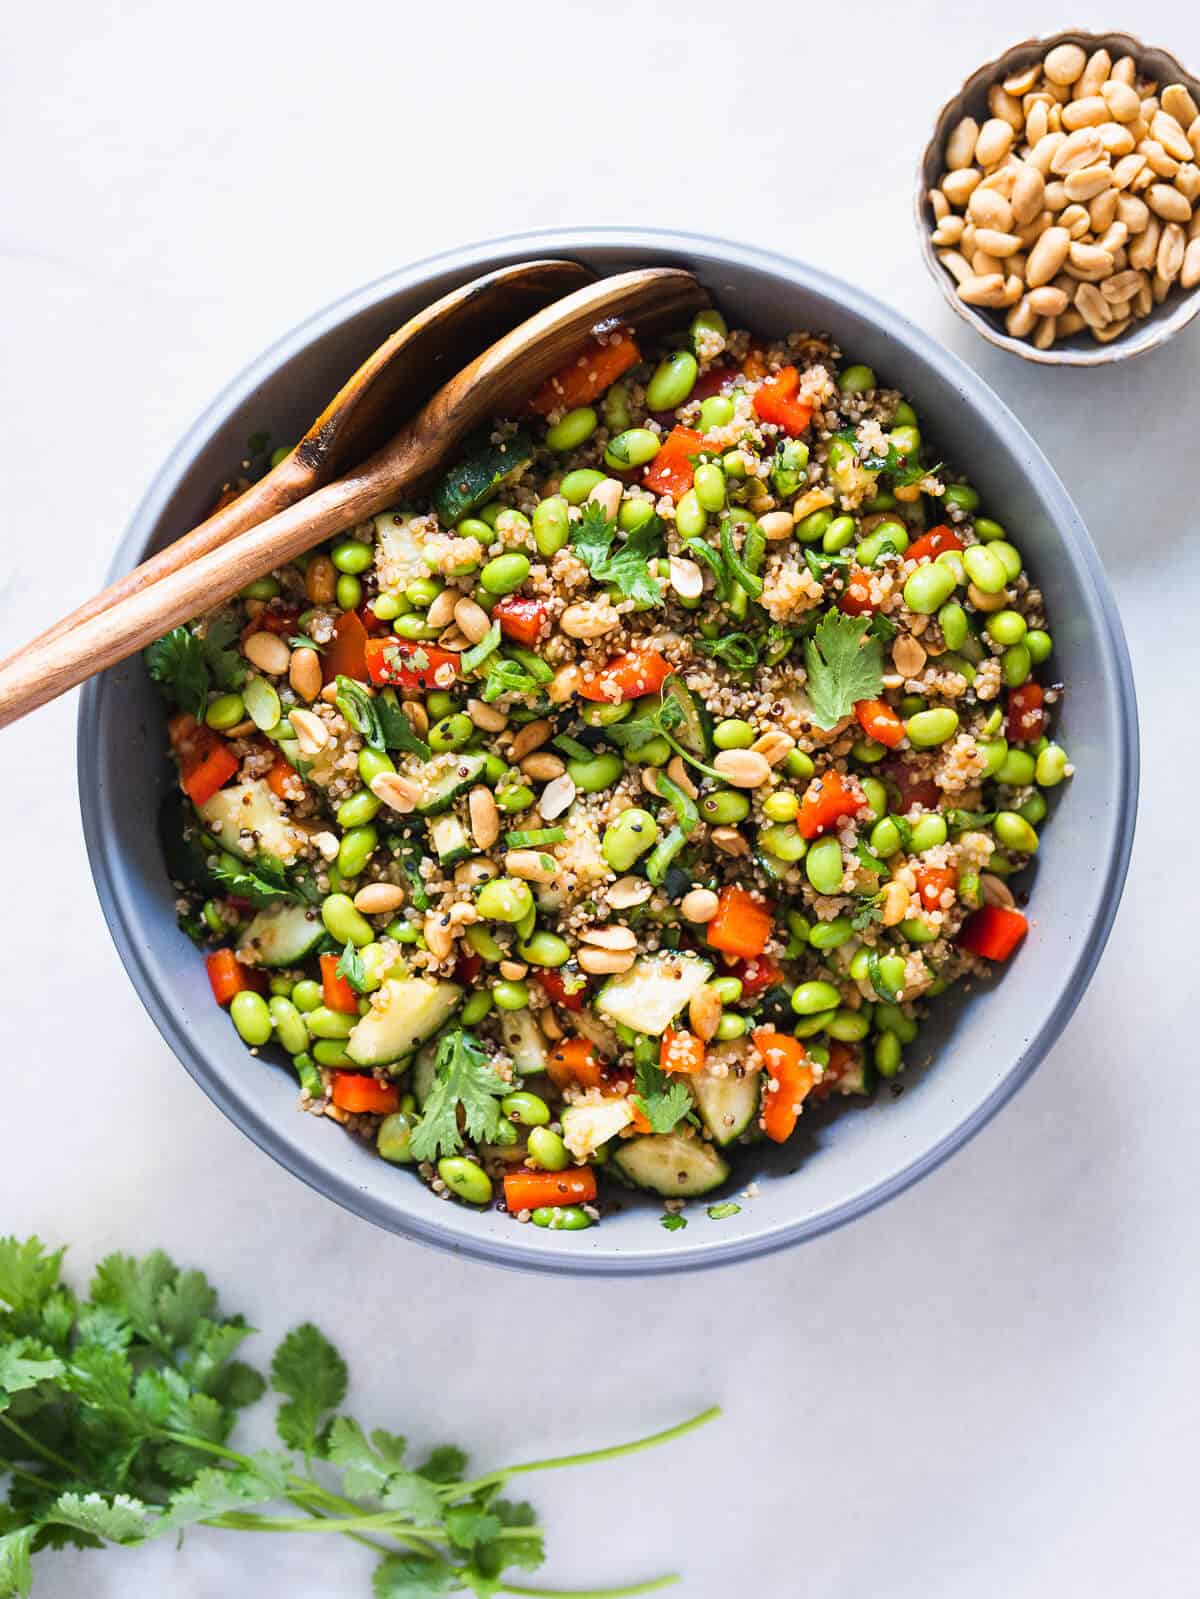 quinoa edamame salad with asian salad dressing served in a large bowl with two wooden serving spoons.